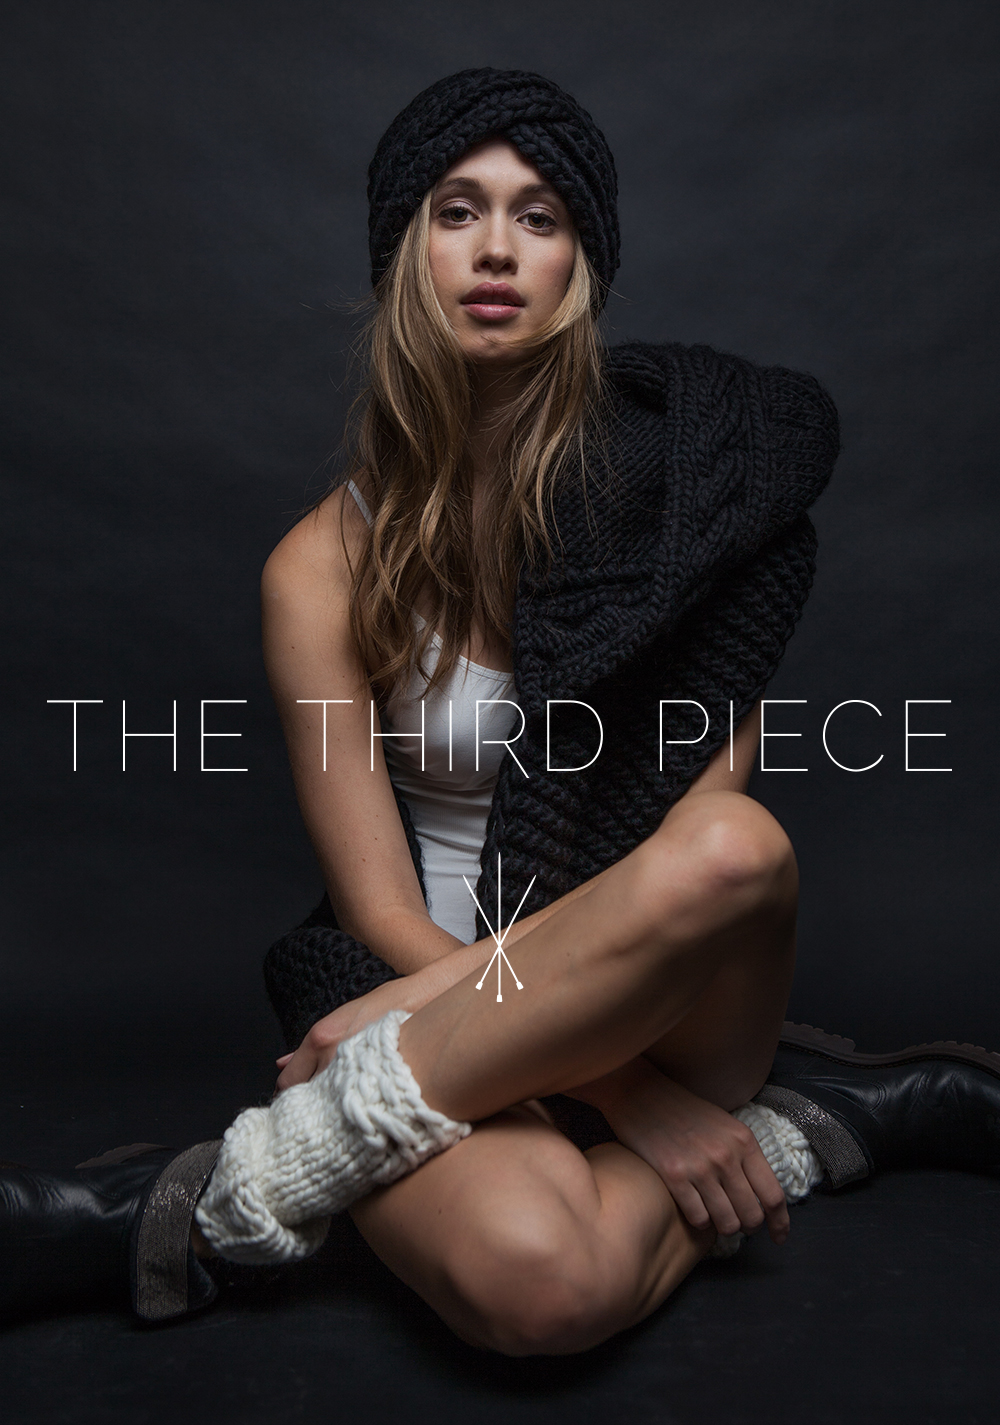 The Third Piece re-branding by JSGD